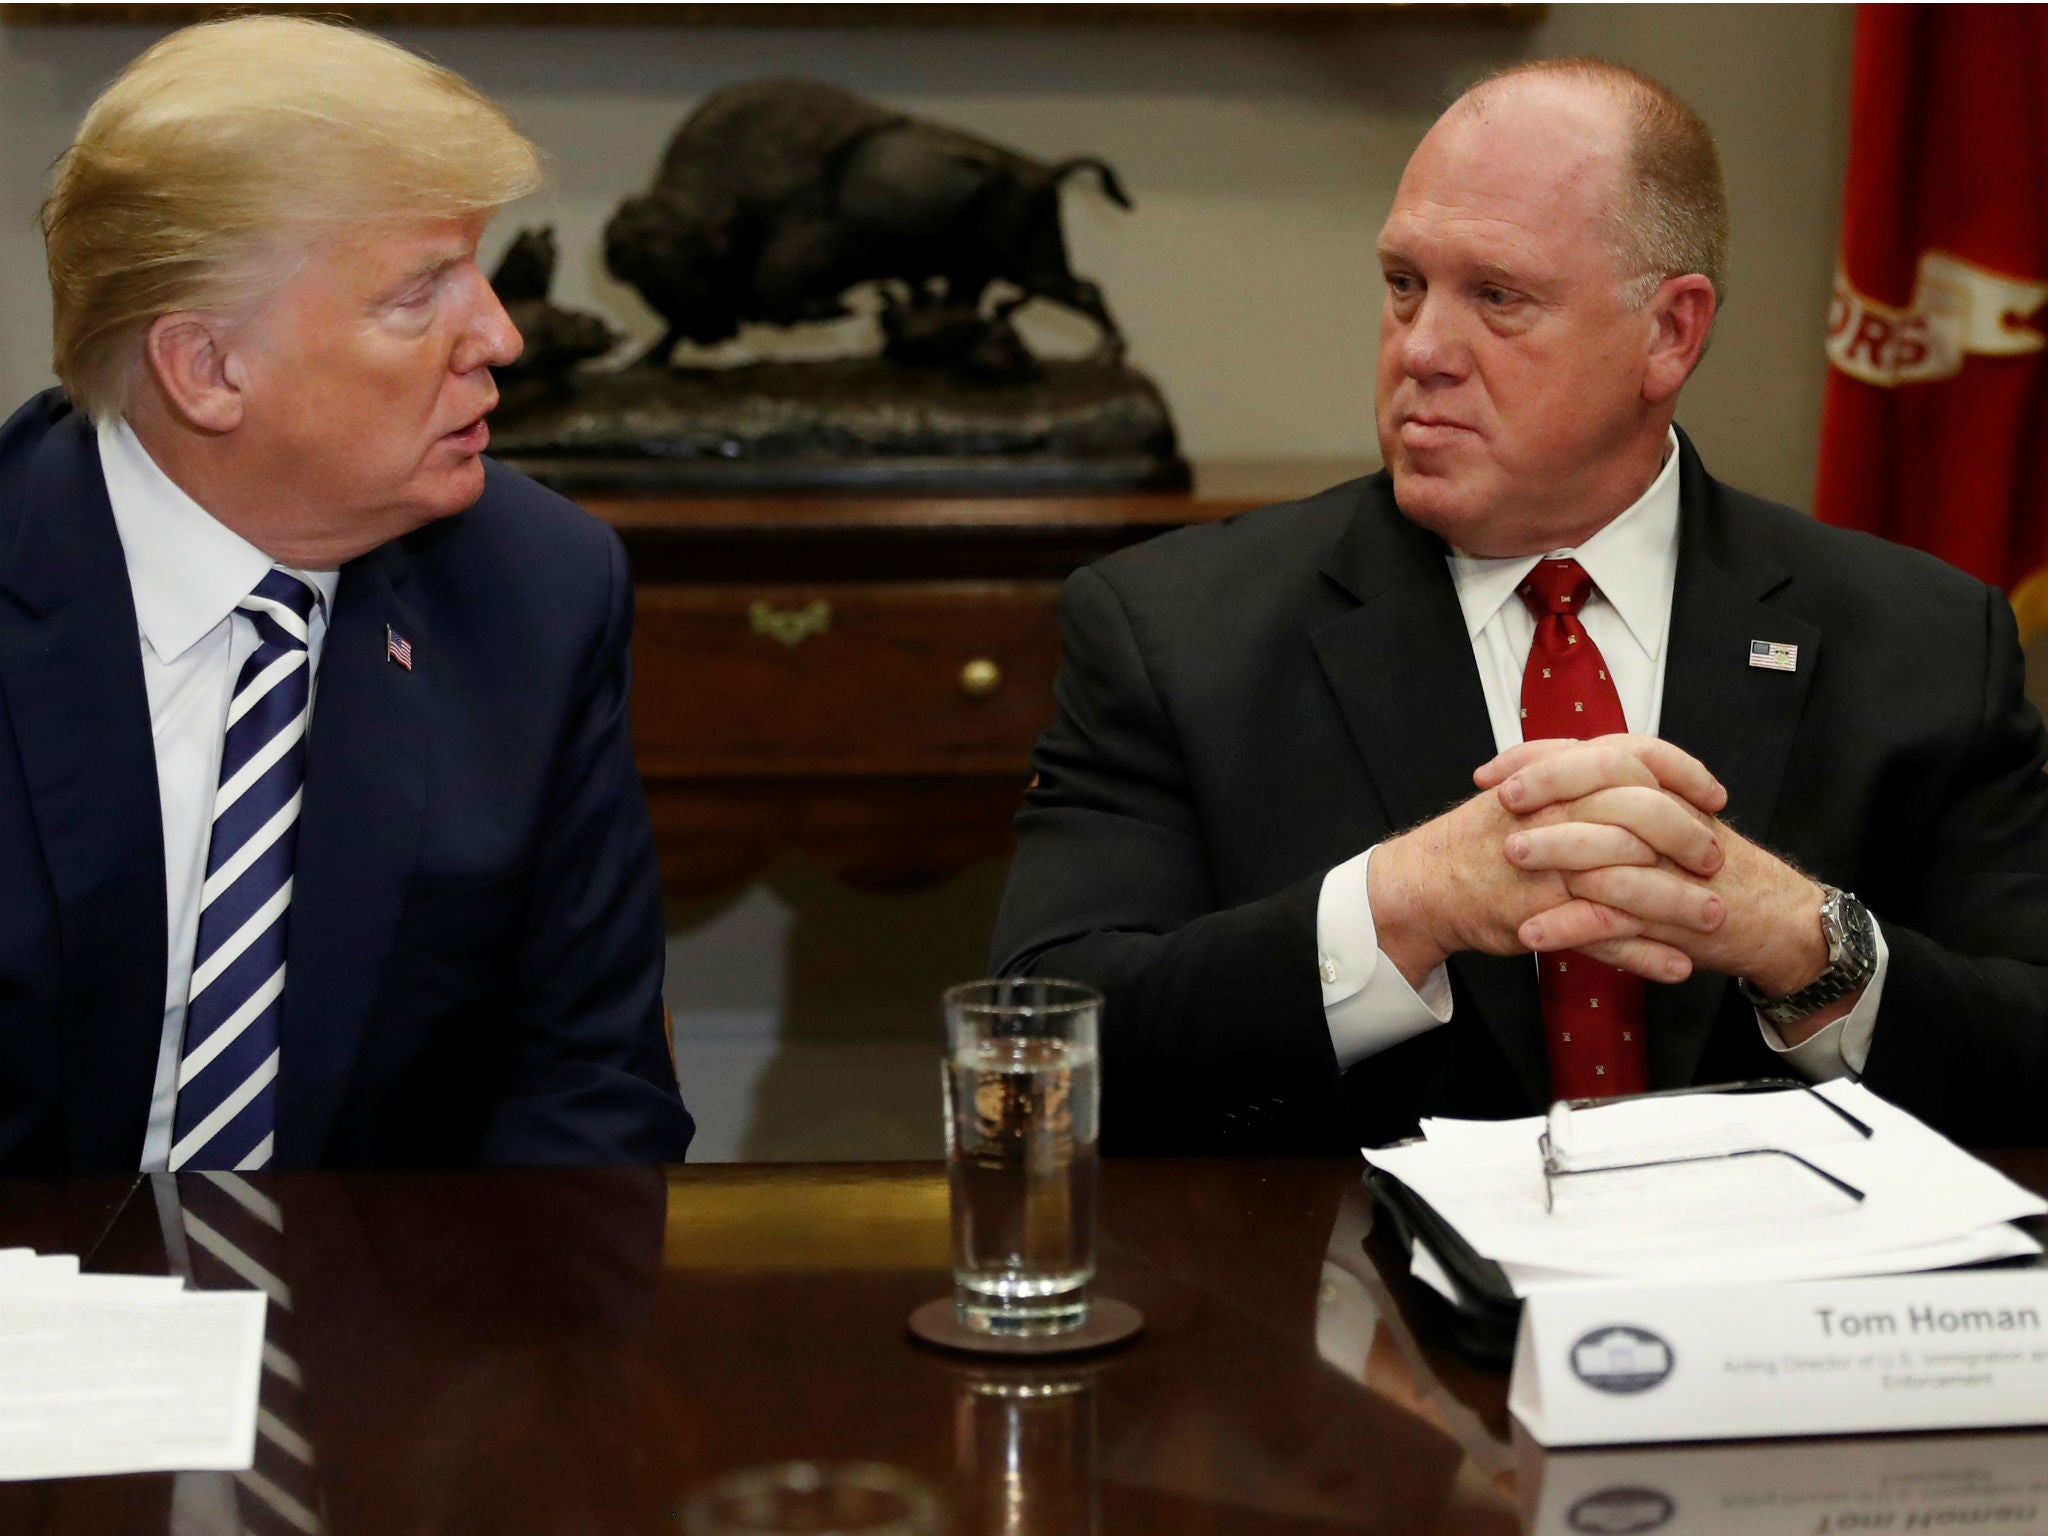 Donald Trump speaks to Thomas Homan during a round table meeting with members of law enforcement at the White House